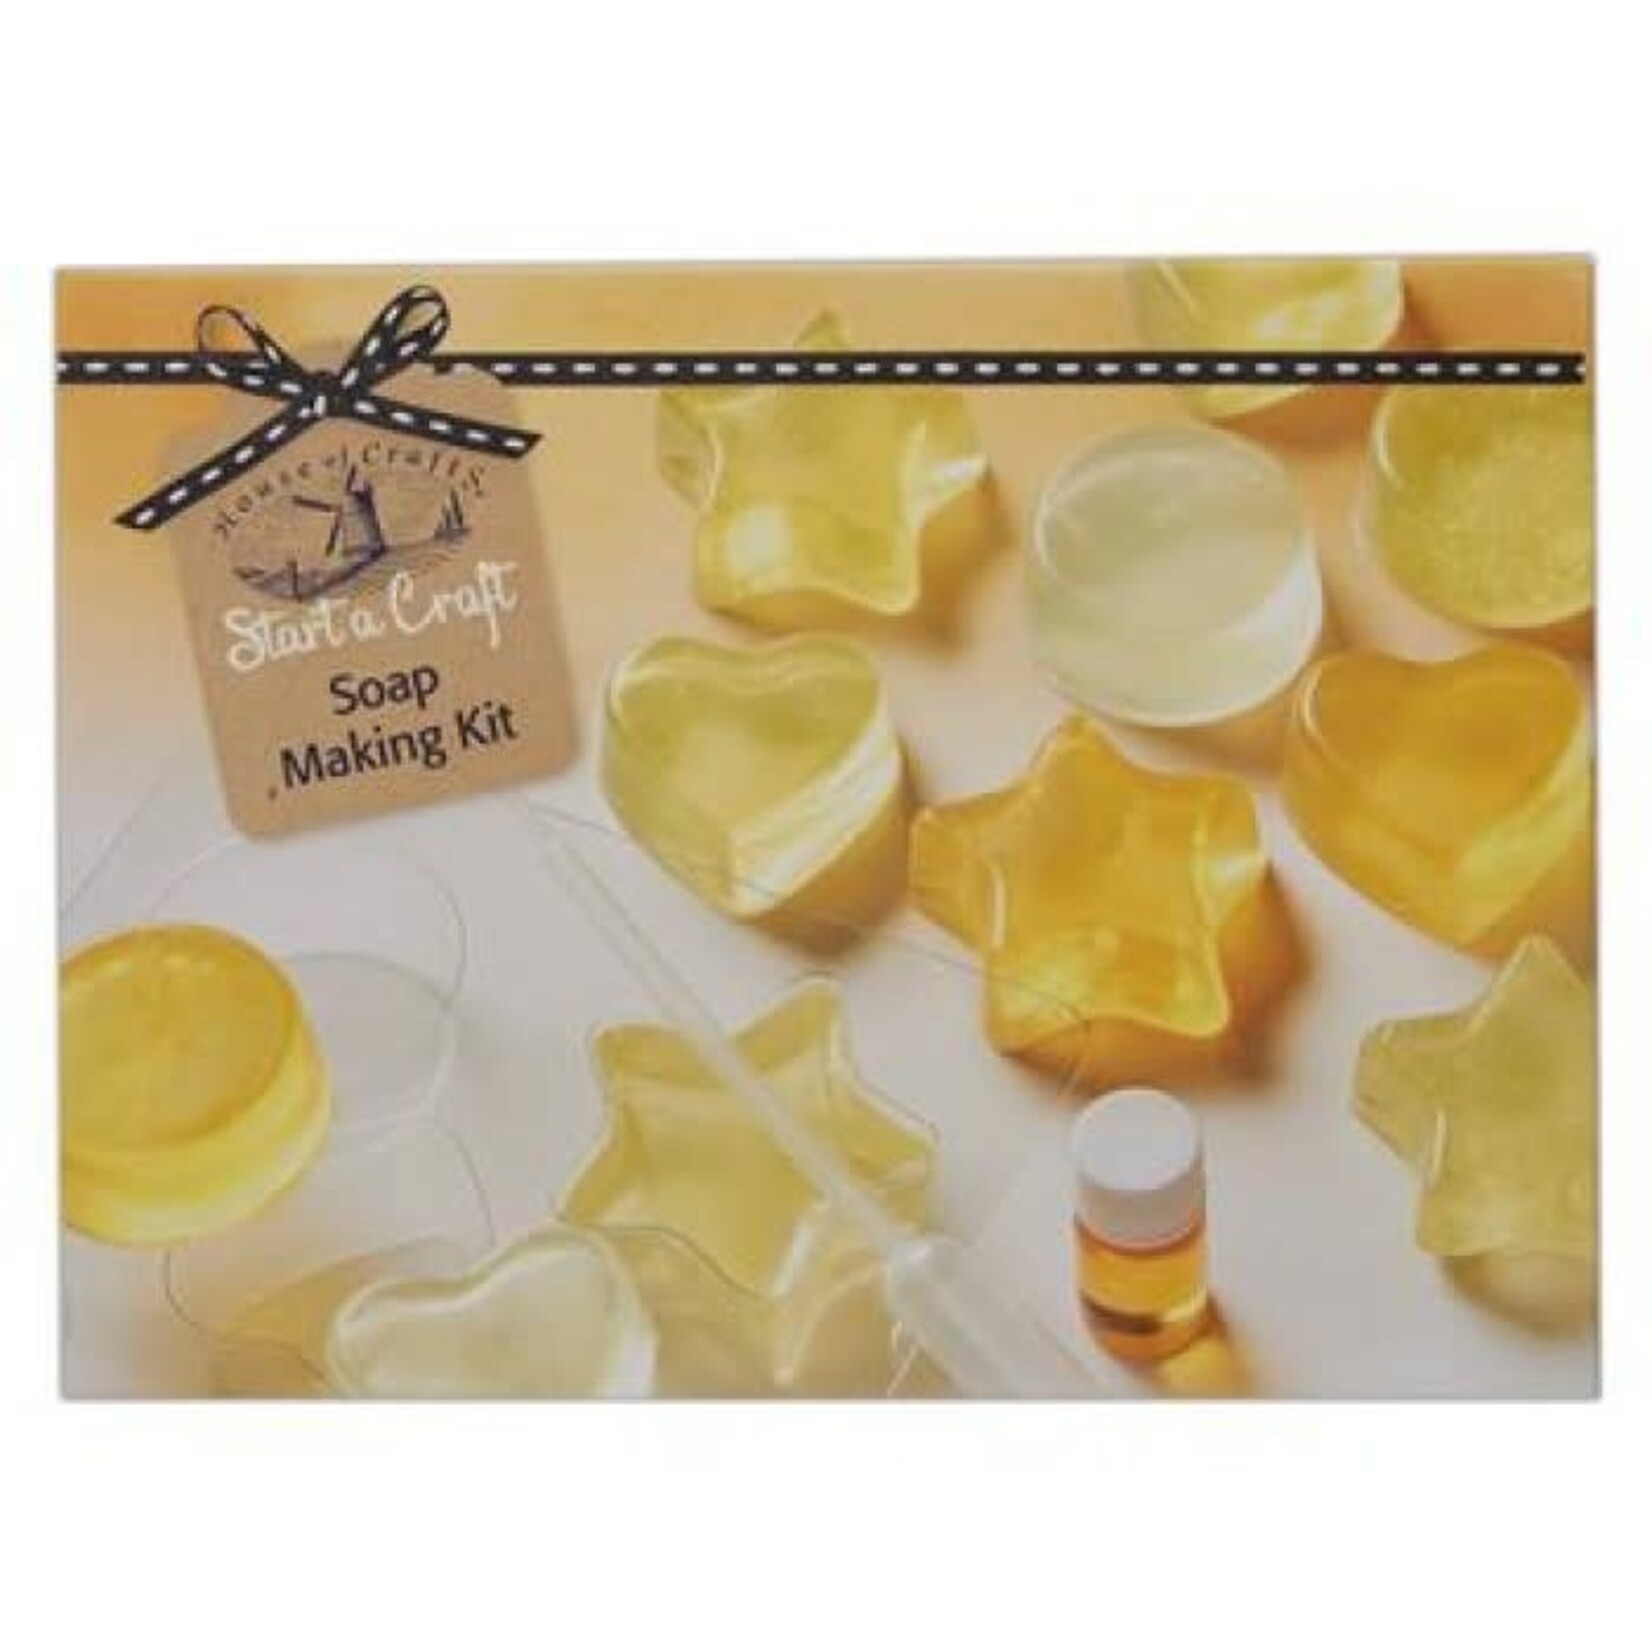 House of craft Soap Making Kit